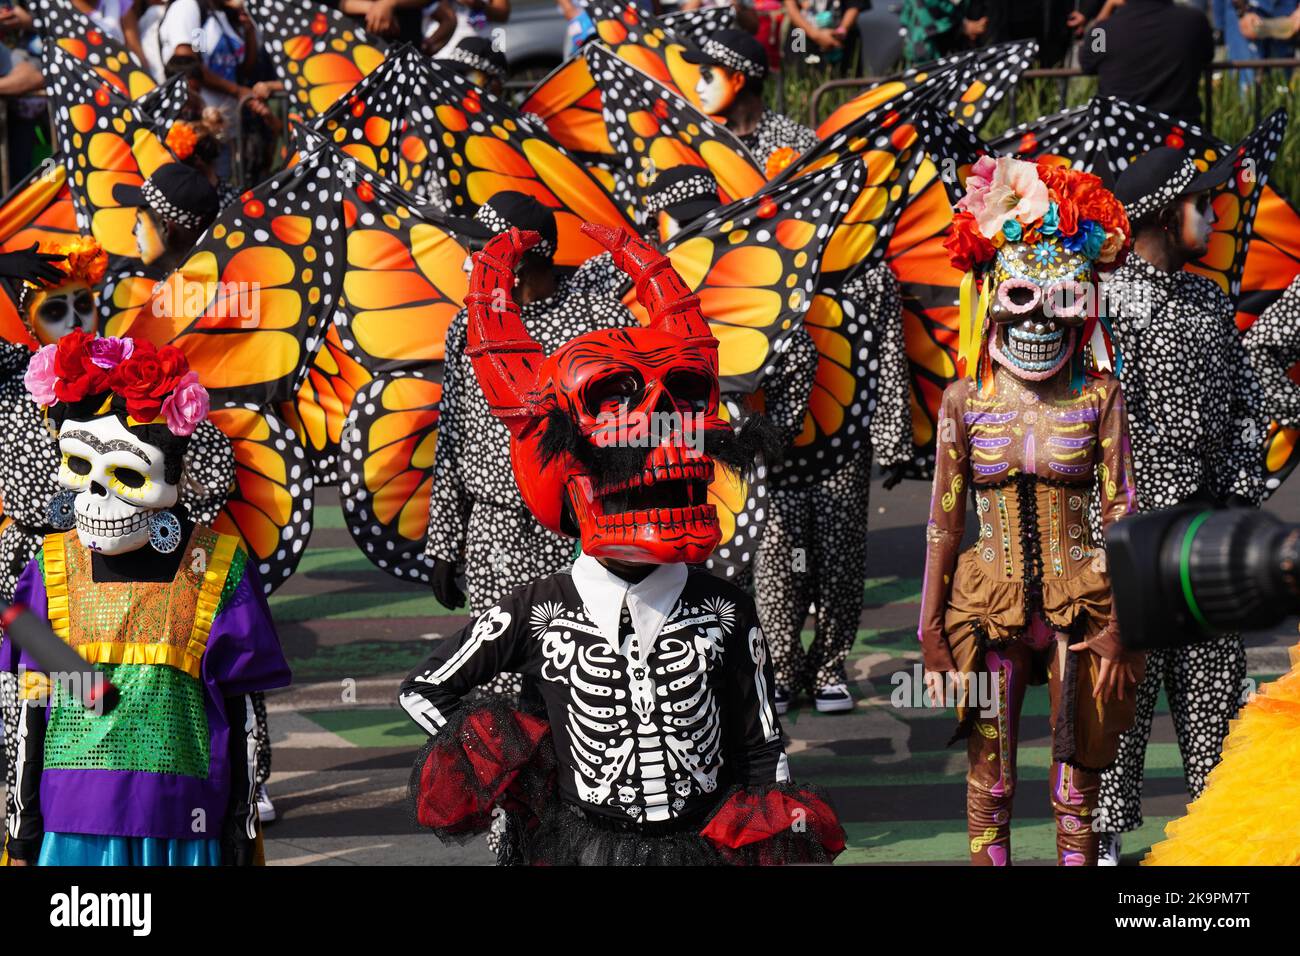 Mexico City, Mexico. 29th Oct, 2022. Skeletons and monarch butterfly costumed performers during the Grand Parade of the Dead to celebrate Dia de los Muertos holiday on Paseo de la Reforma, October 29, 2022 in Mexico City, Mexico. Credit: Richard Ellis/Richard Ellis/Alamy Live News Stock Photo